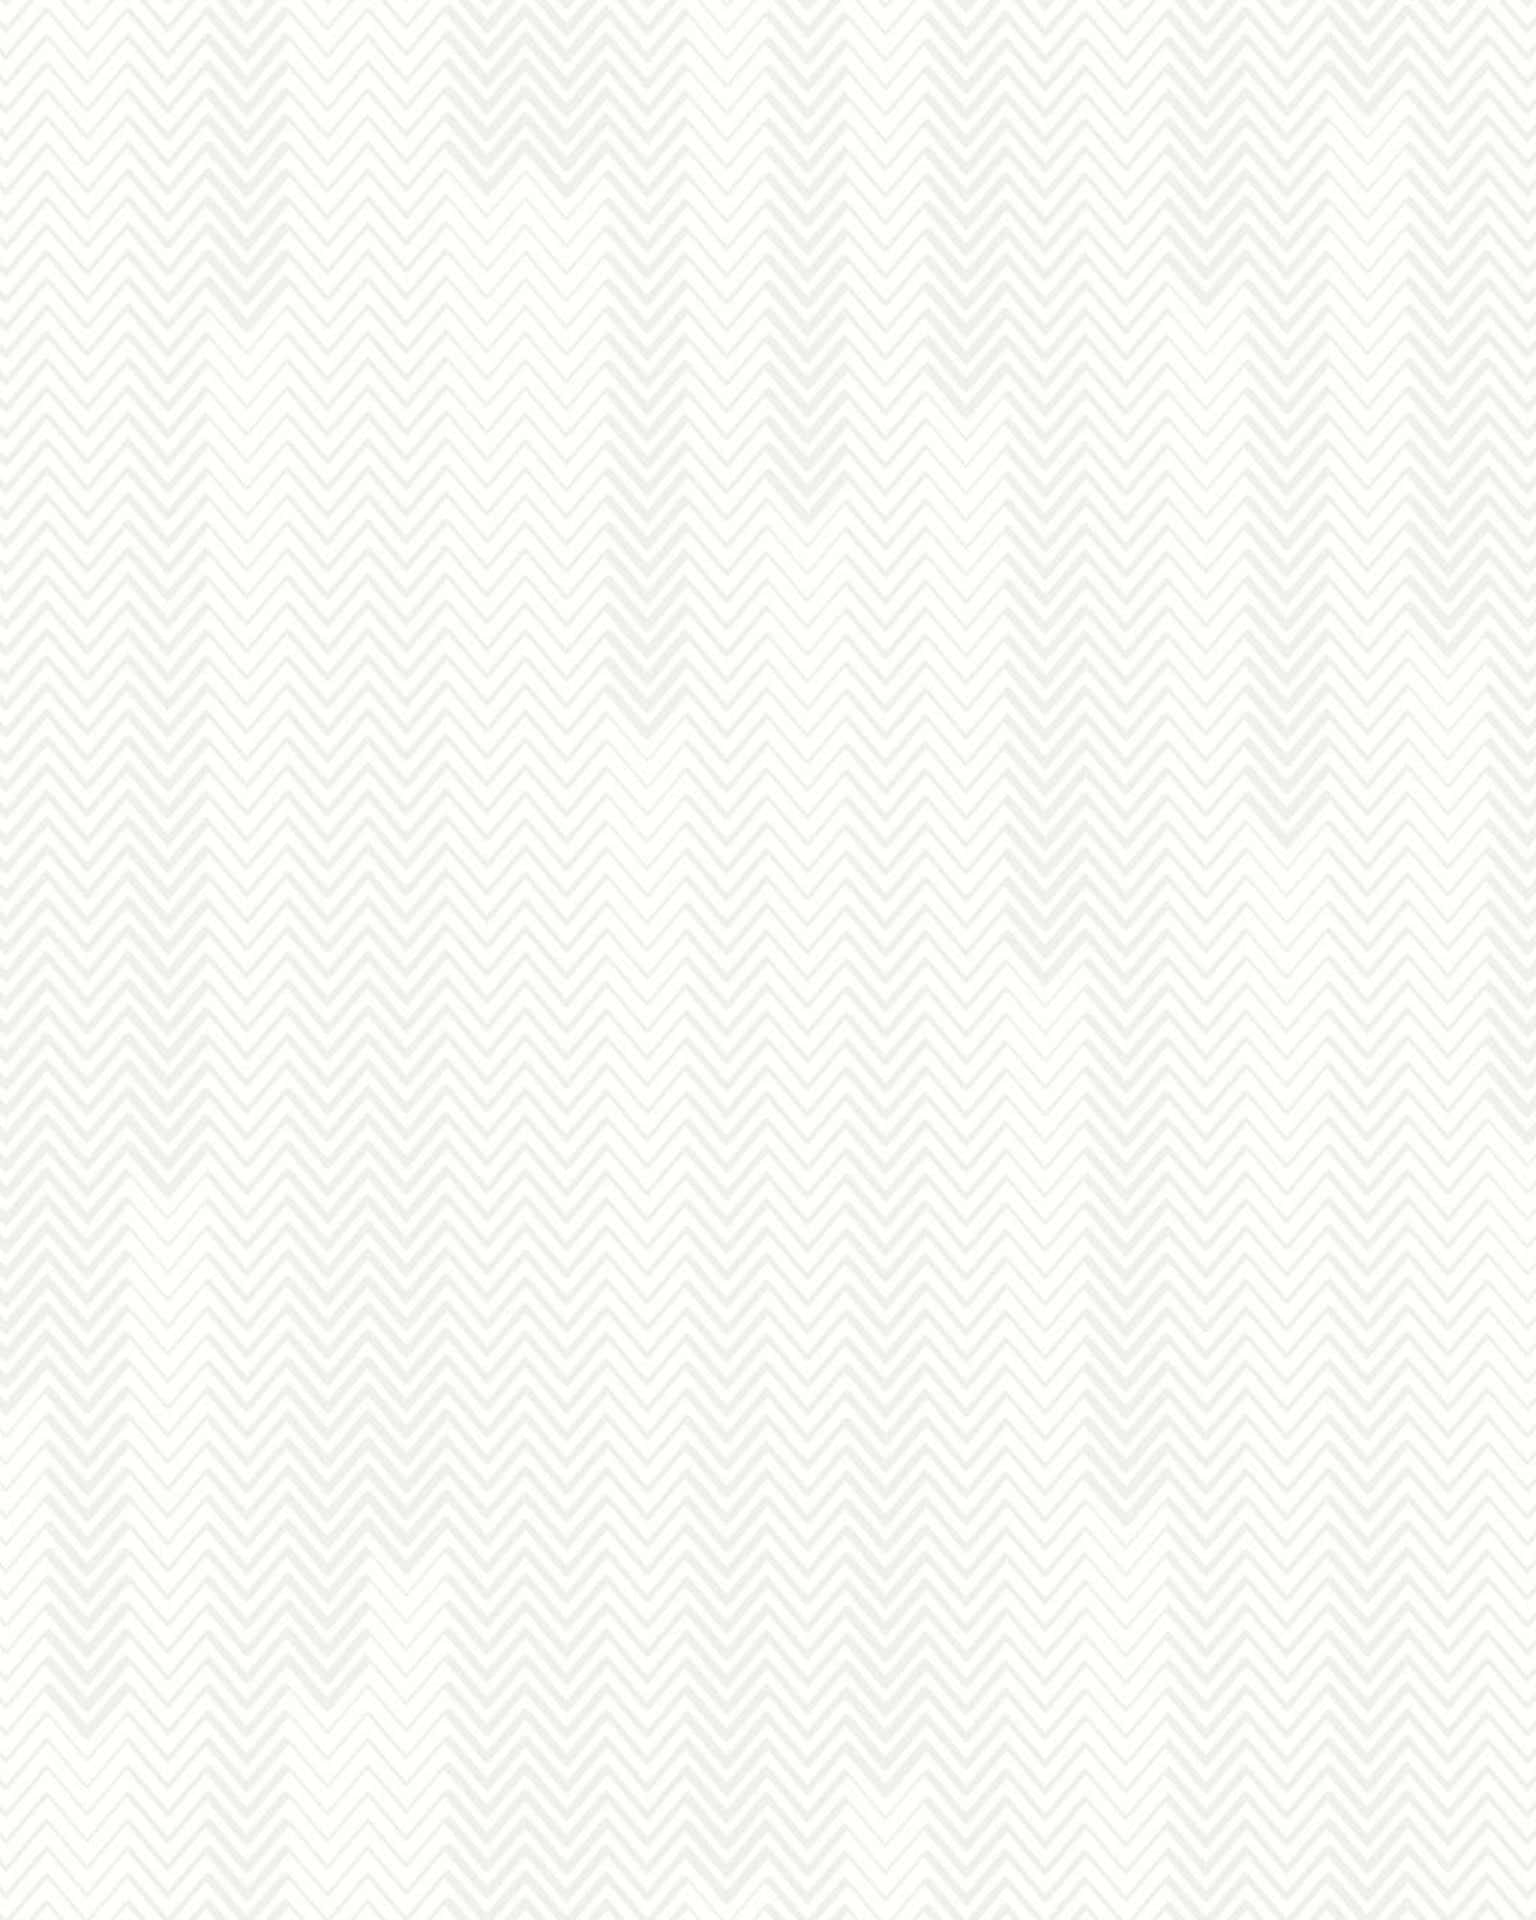 A beautiful ridged gradient background in a subtle grey and white color.